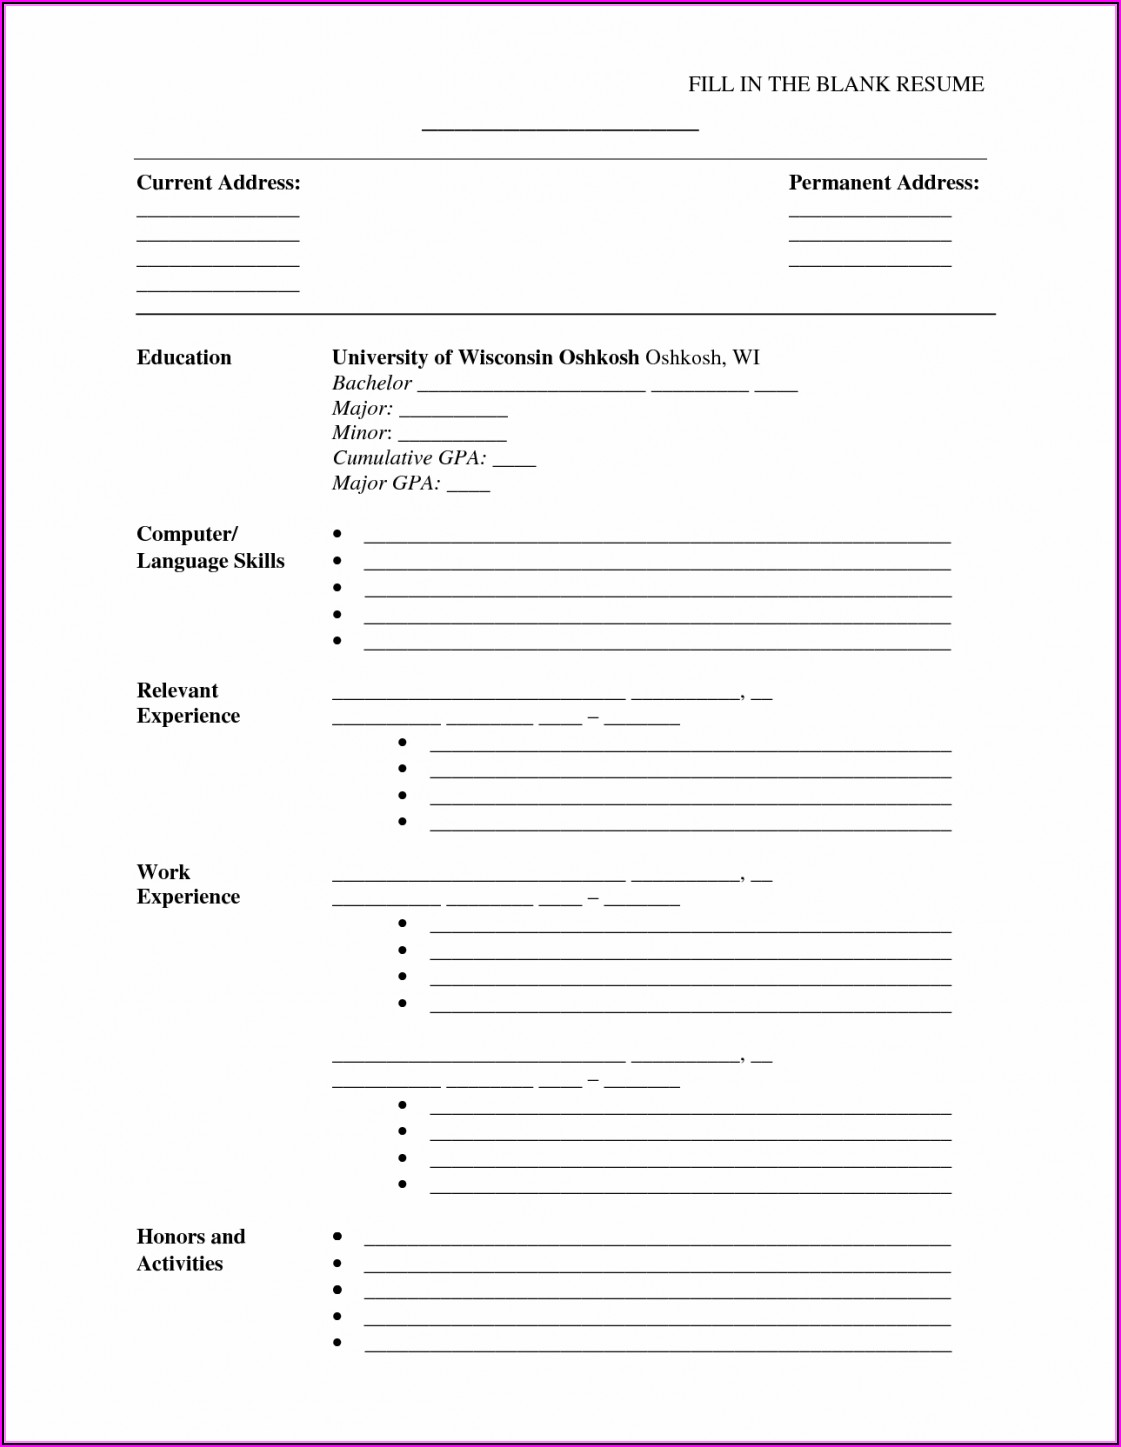 Resume Fill In The Blanks Free Template